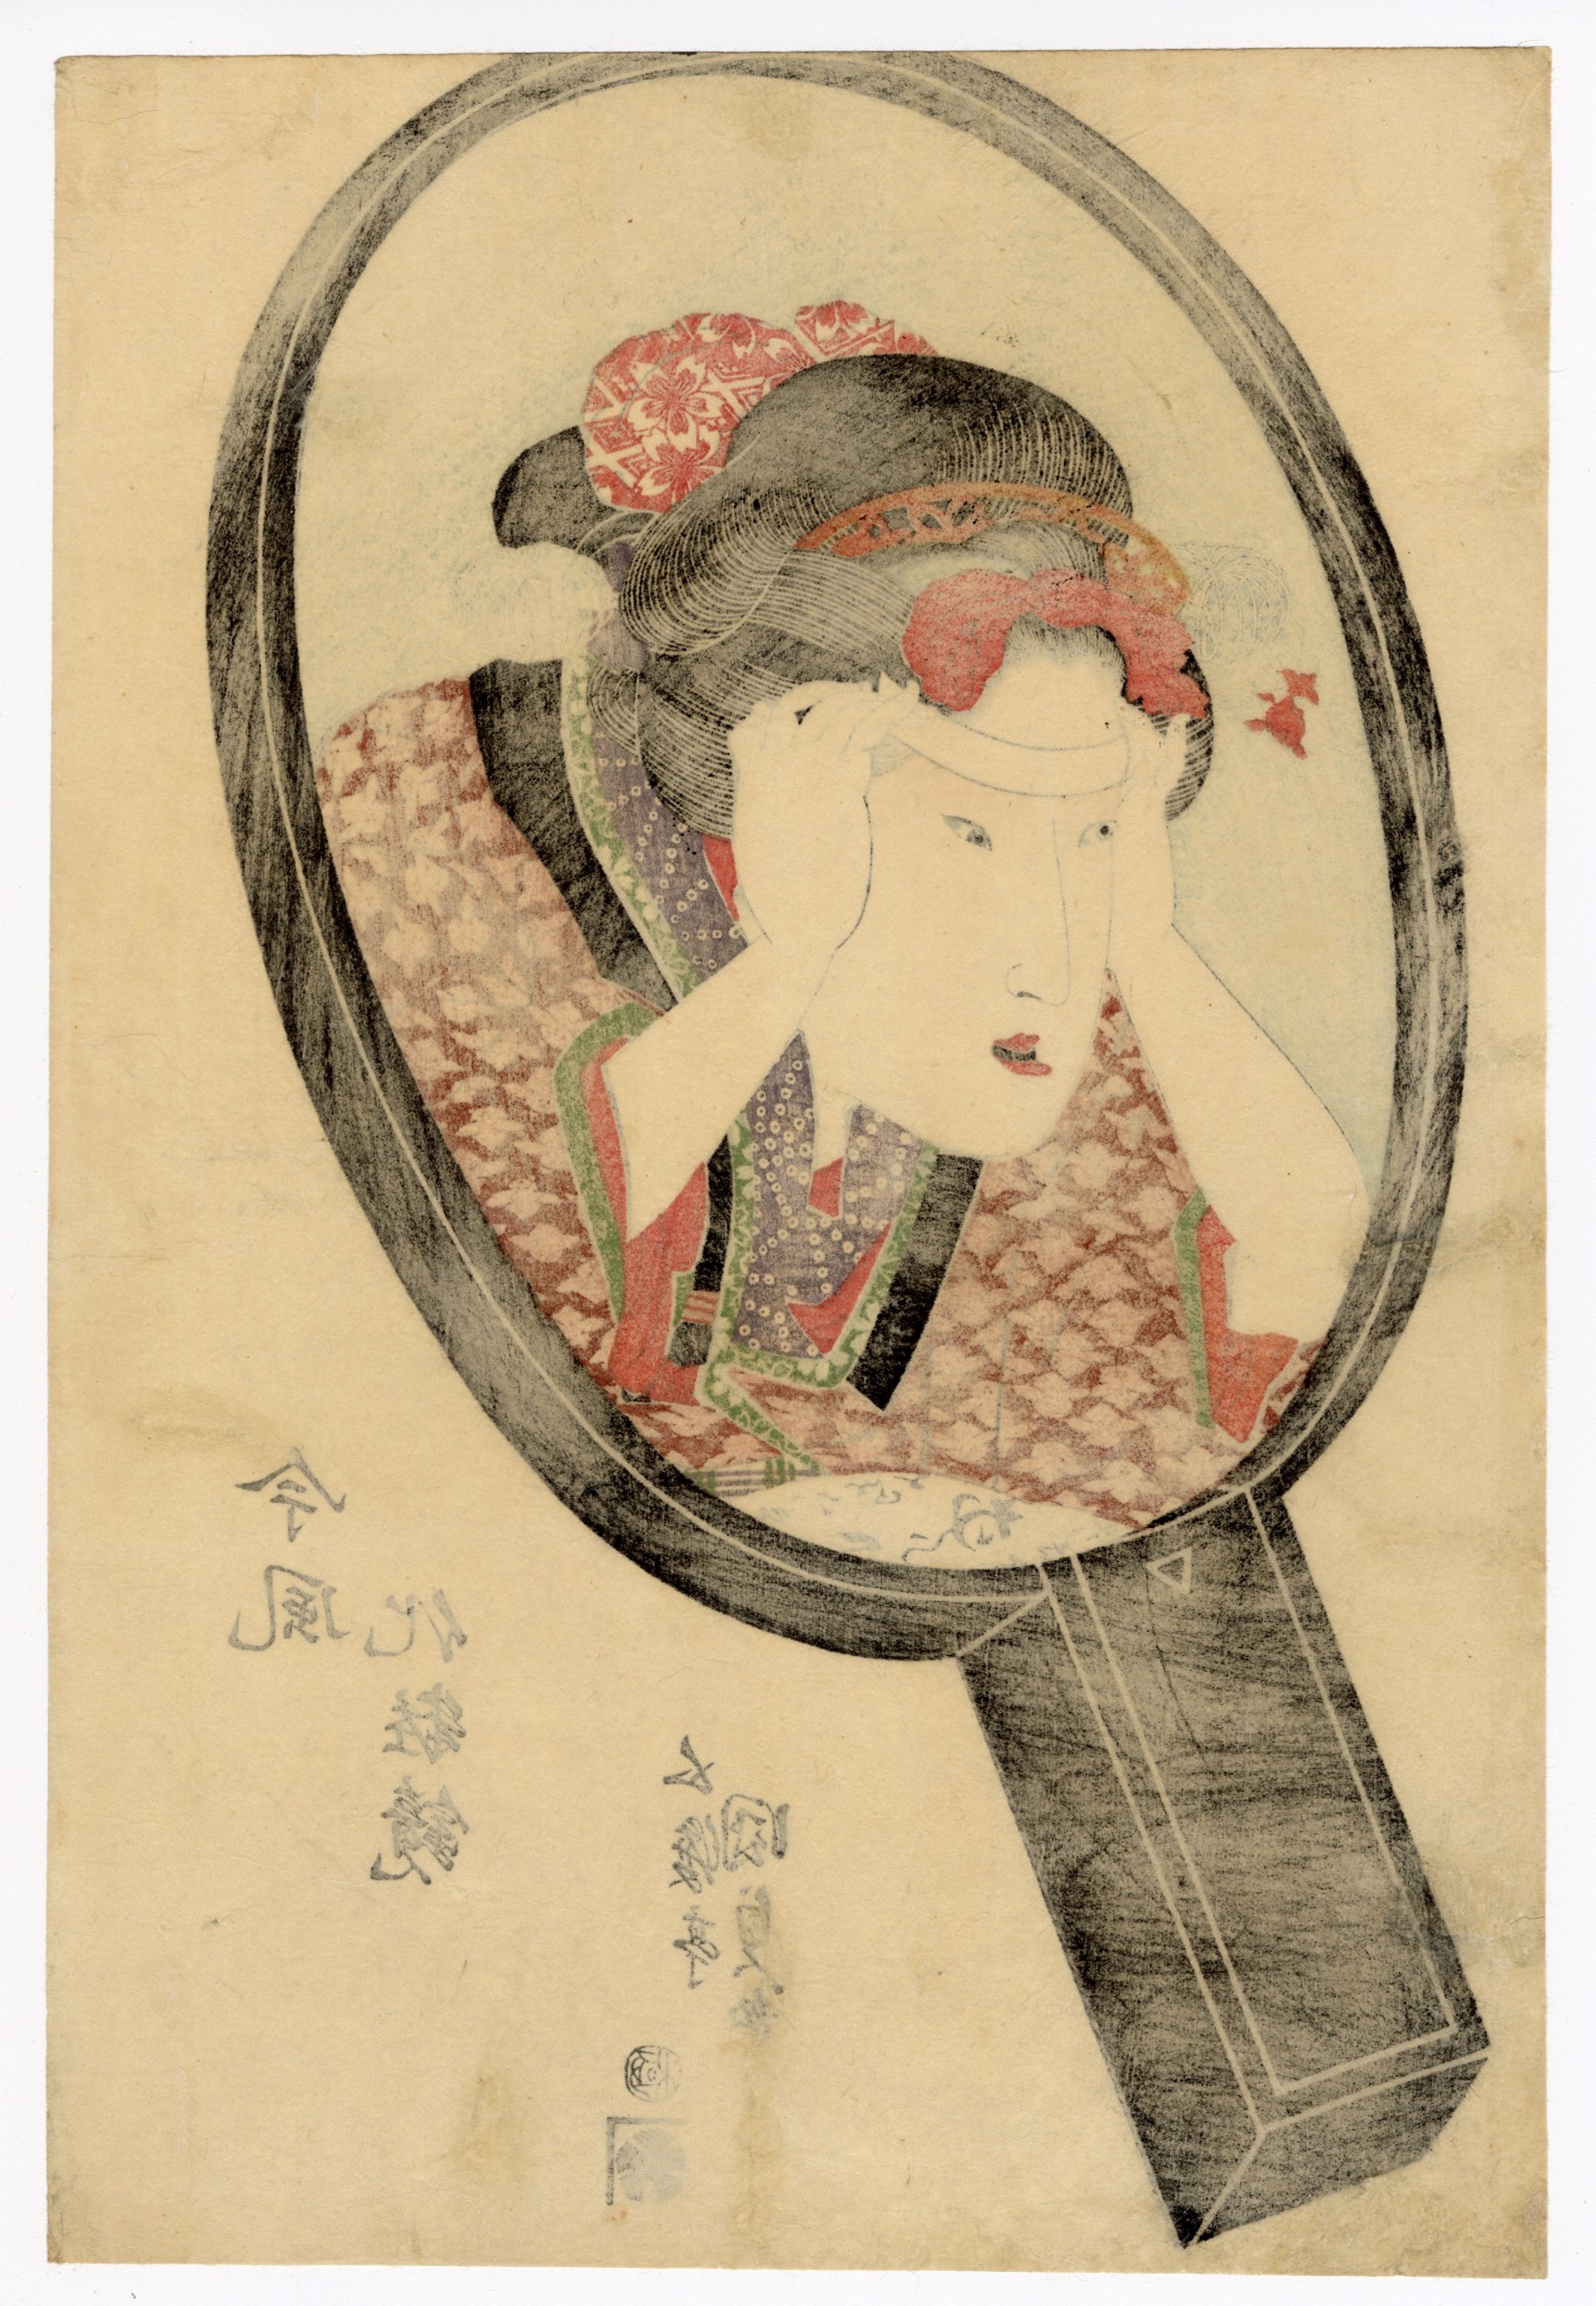 Covering the Eyebrows by Kunisada